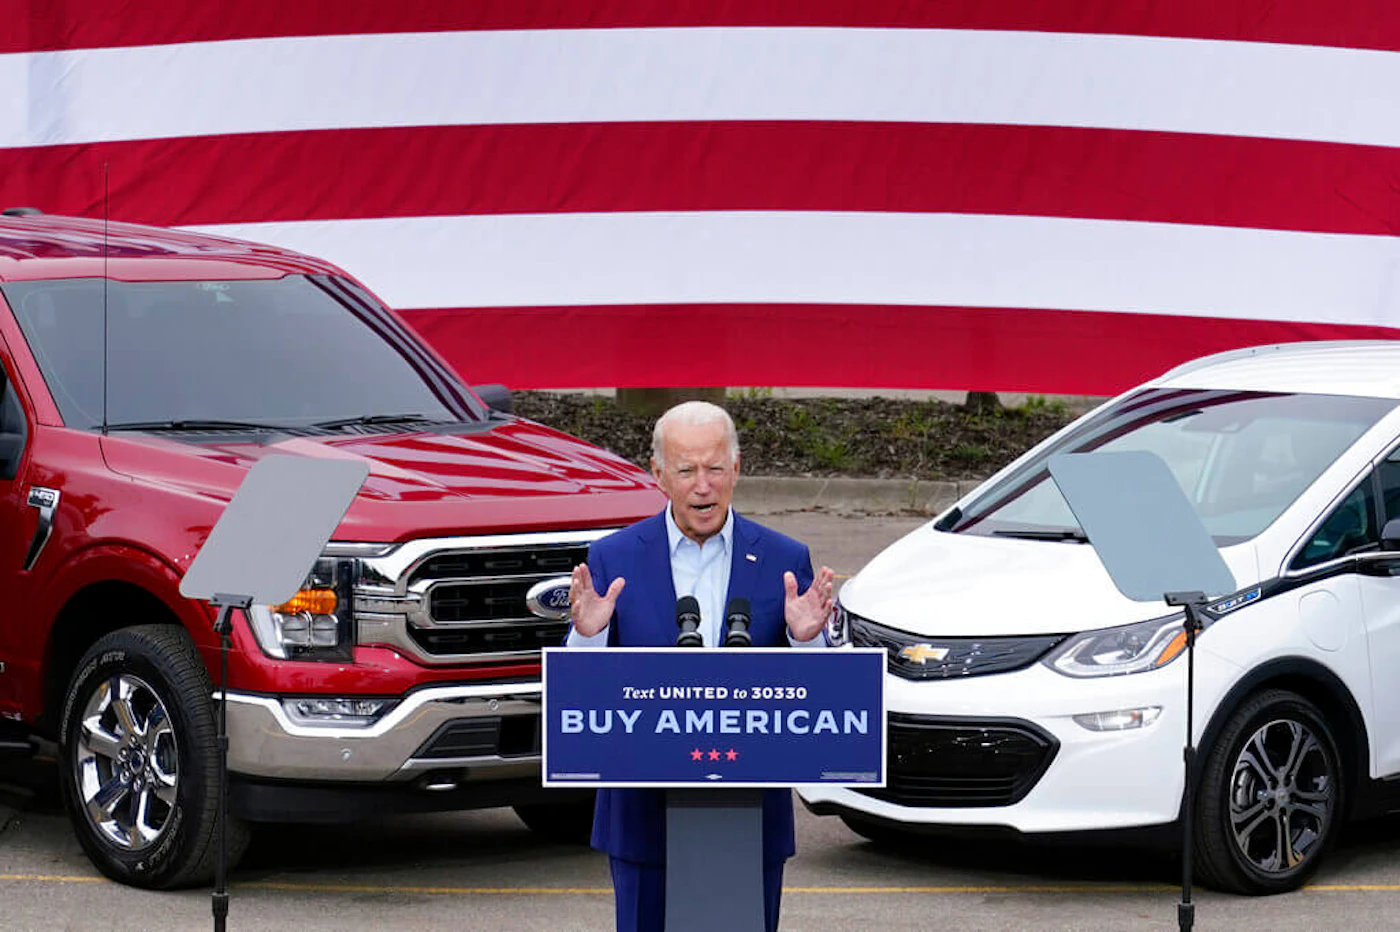 Democratic presidential candidate former Vice President Joe Biden speaks during a campaign event on manufacturing American products at UAW Region 1 headquarters in Warren, Mich., Wednesday, Sept. 9, 2020. (AP Photo/Patrick Semansky)